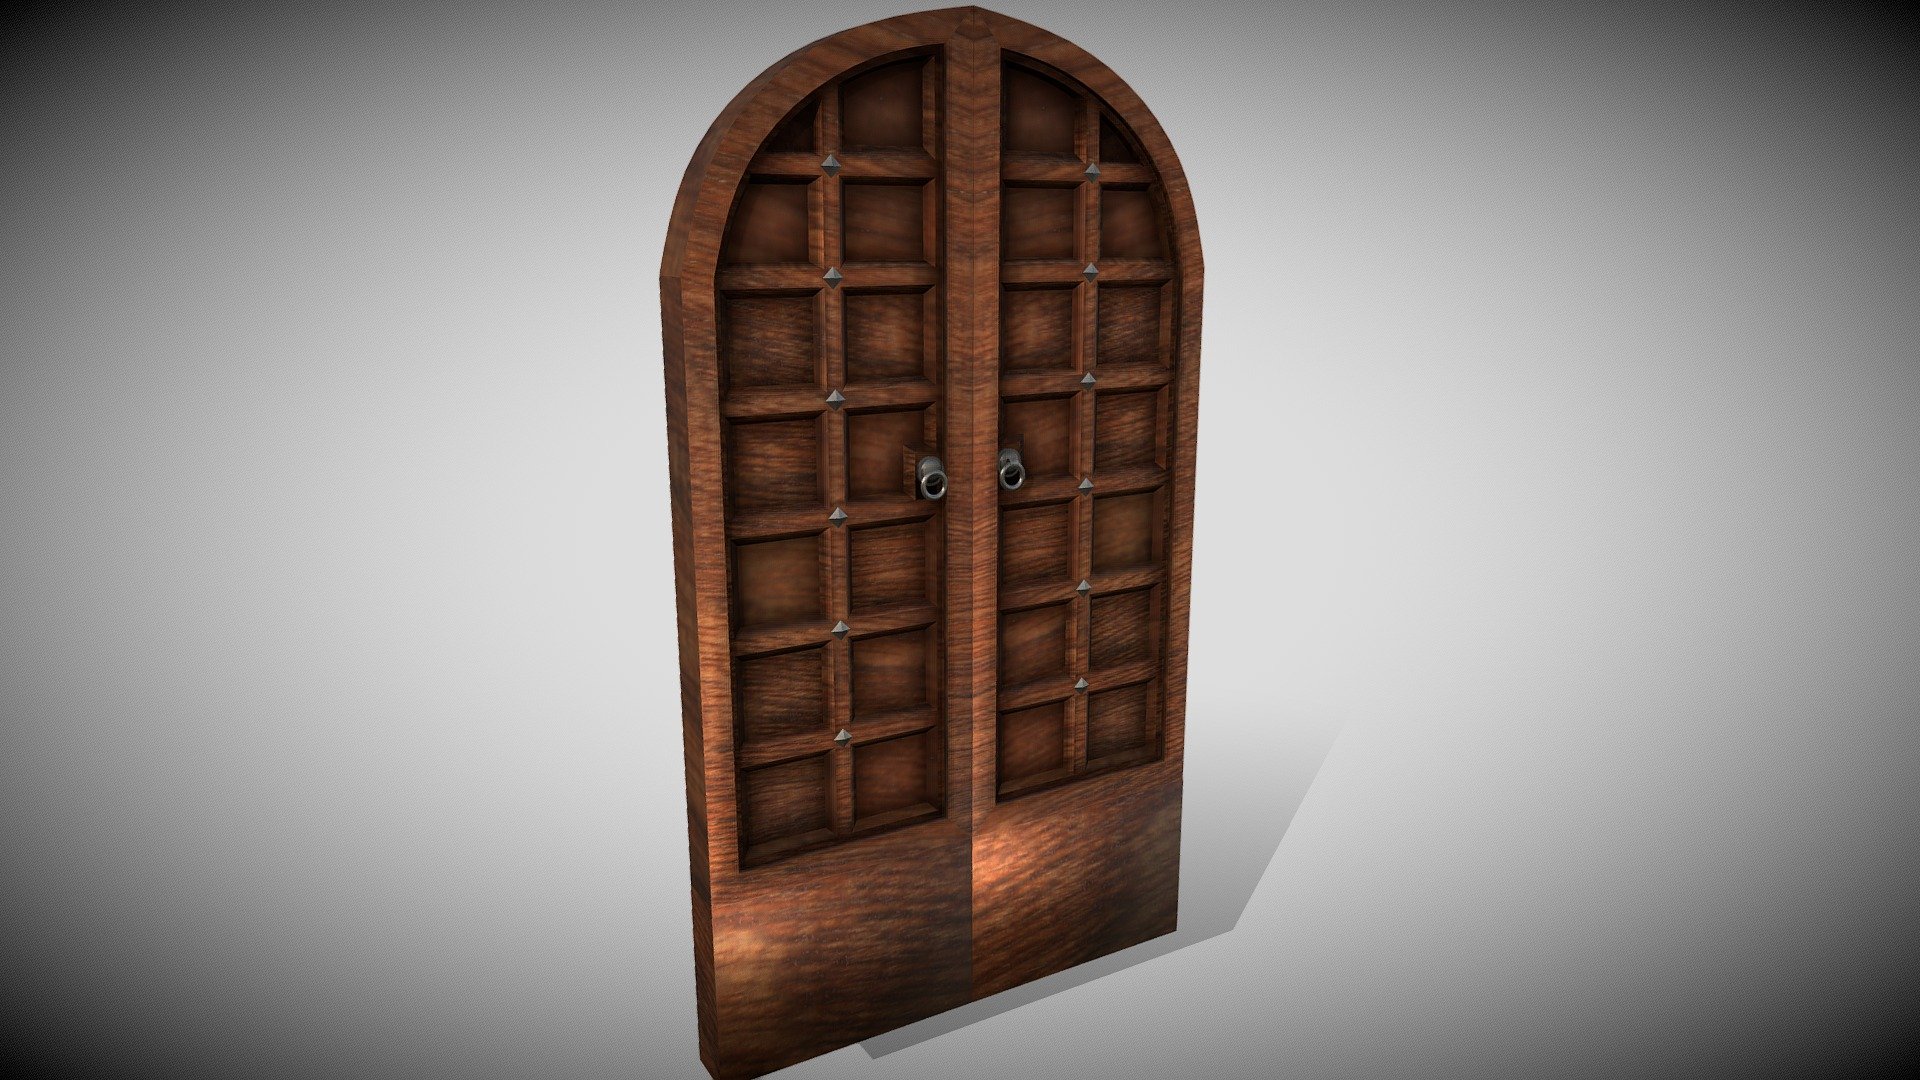 Medieval doors featuring hardwood 1024x1024 texture and metal material for the fixtures.
Game ready low poly model.
6431 Polygons 3d model